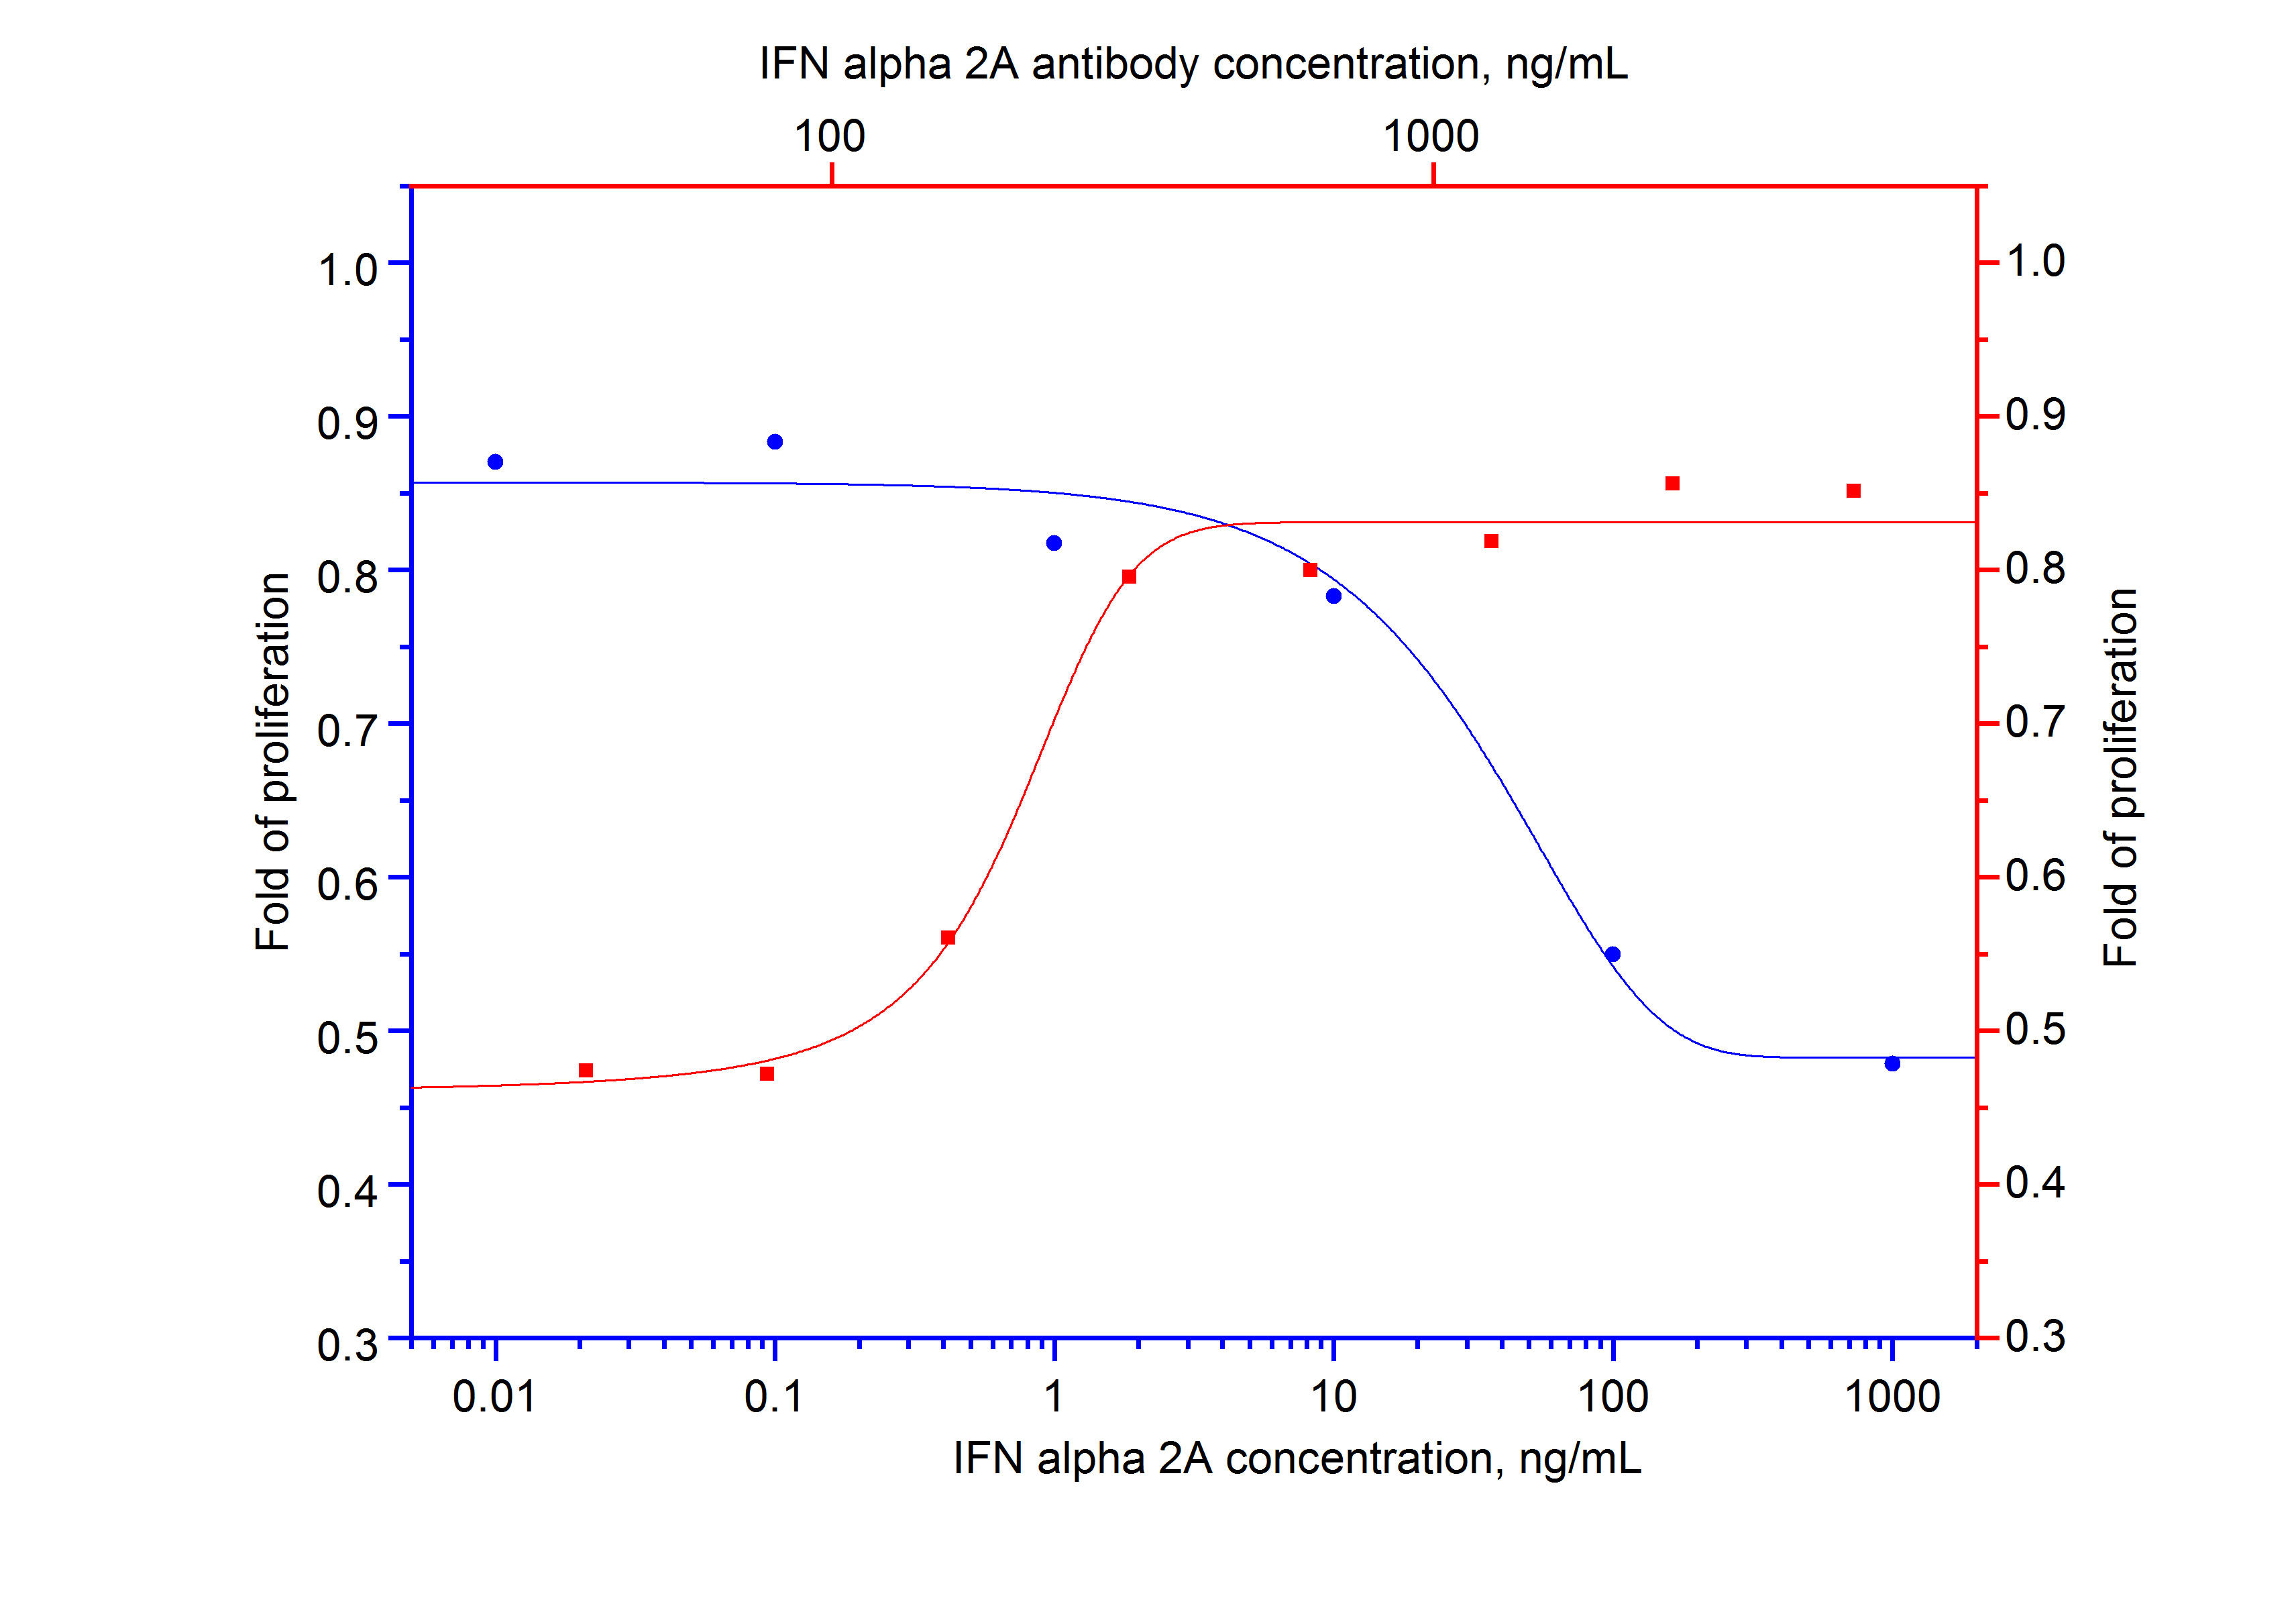 Recombinant human IFN alpha 2A (Cat.NO. HZ-1066) inhibits the growth of TF-1 cell line (human erythroleukemic cell line)  in a dose-dependent manner (blue curve, refer to bottom X-left Y).  The activity of human IFN alpha 2A (100 ng/mL HZ-1066) is neutralized by mouse anti-human IFN alpha 2A monoclonal antibody 69008-1-Ig at serial dose (red curve, refer to top X-right Y). The ND50 is typically 300-500 ng/mL.